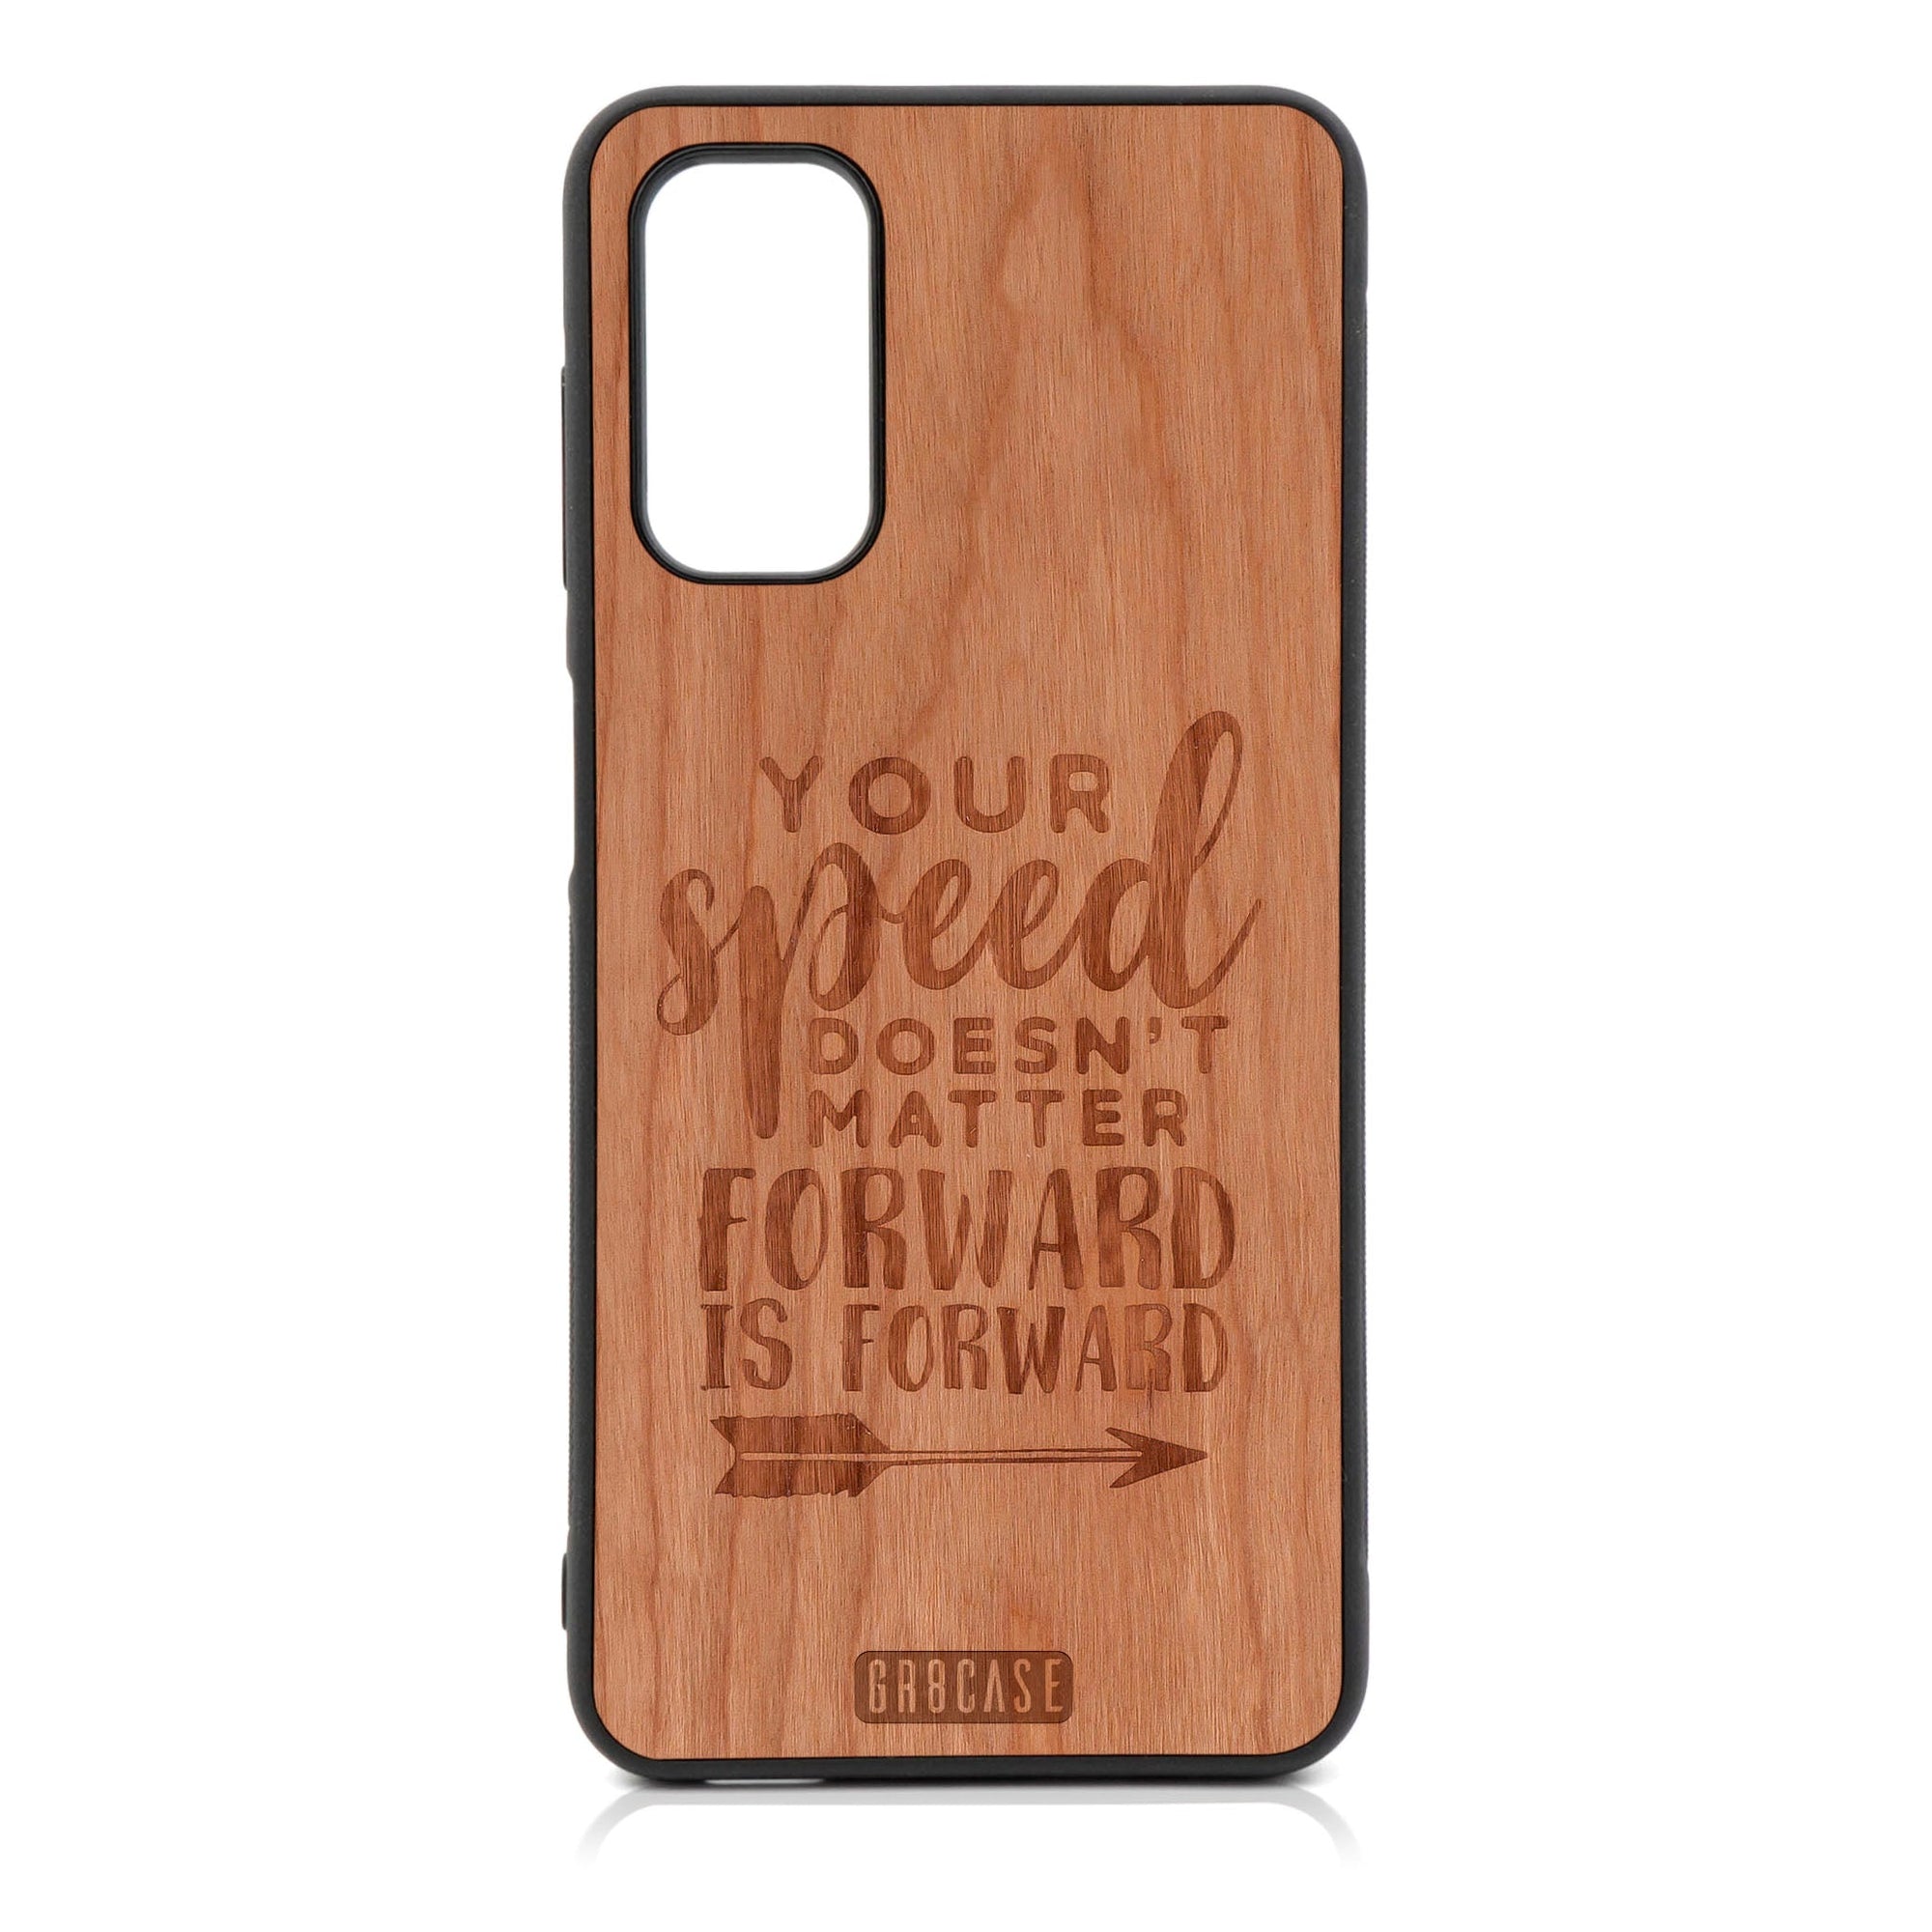 Your Speed Doesn't Matter Forward Is Forward Design Wood Case For Galaxy A14 5G